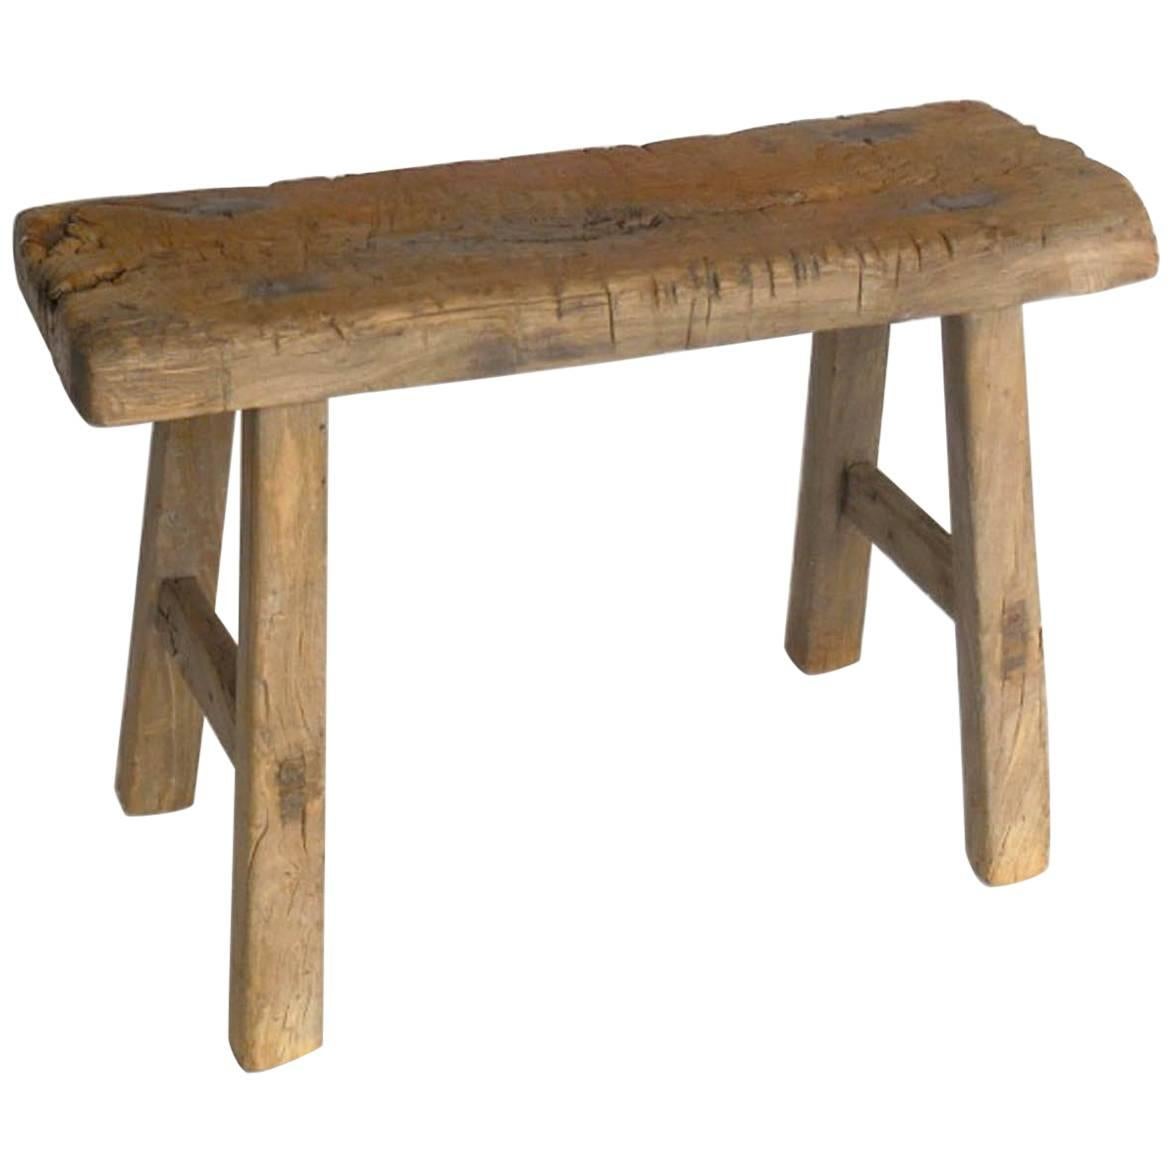 19th Century Chinese Bench or Stool in Elm Wood